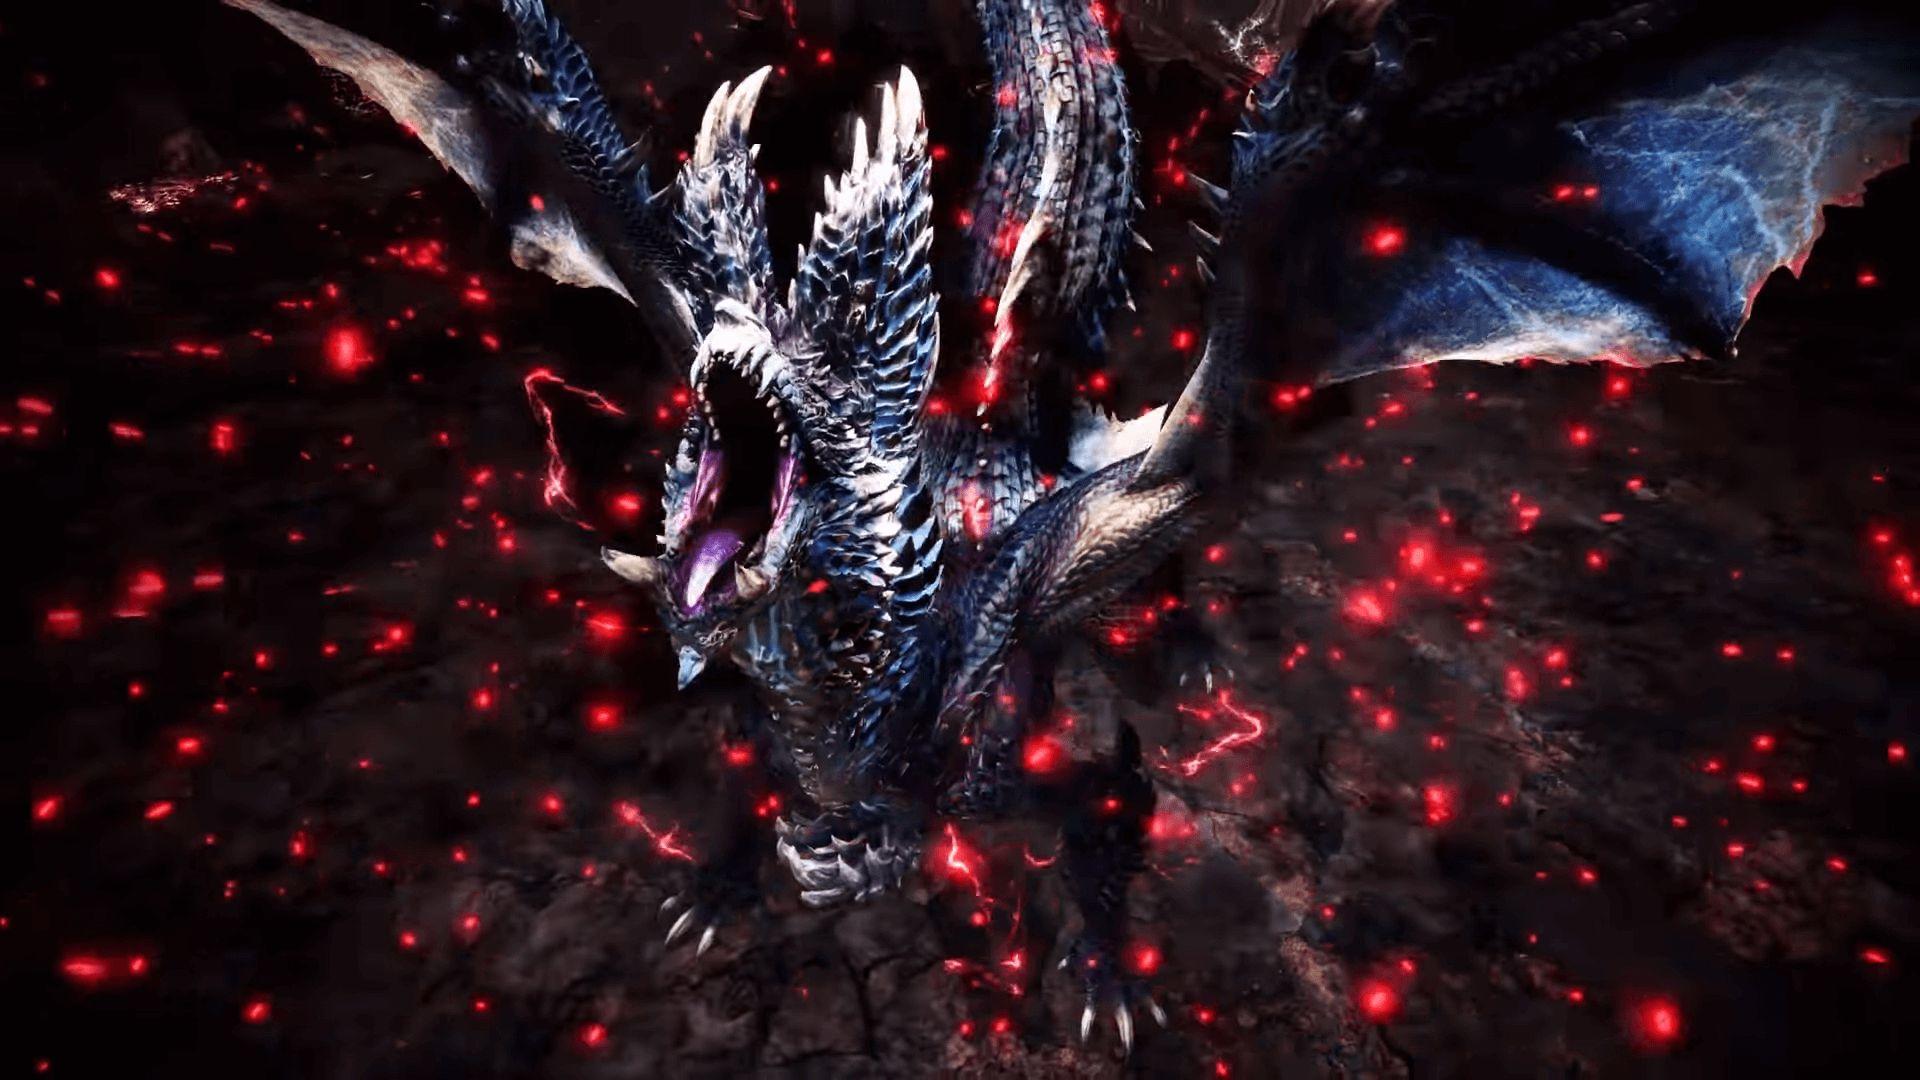 Monster Hunter World's Alatreon Update Launches July New Developer Diary Coming This Week